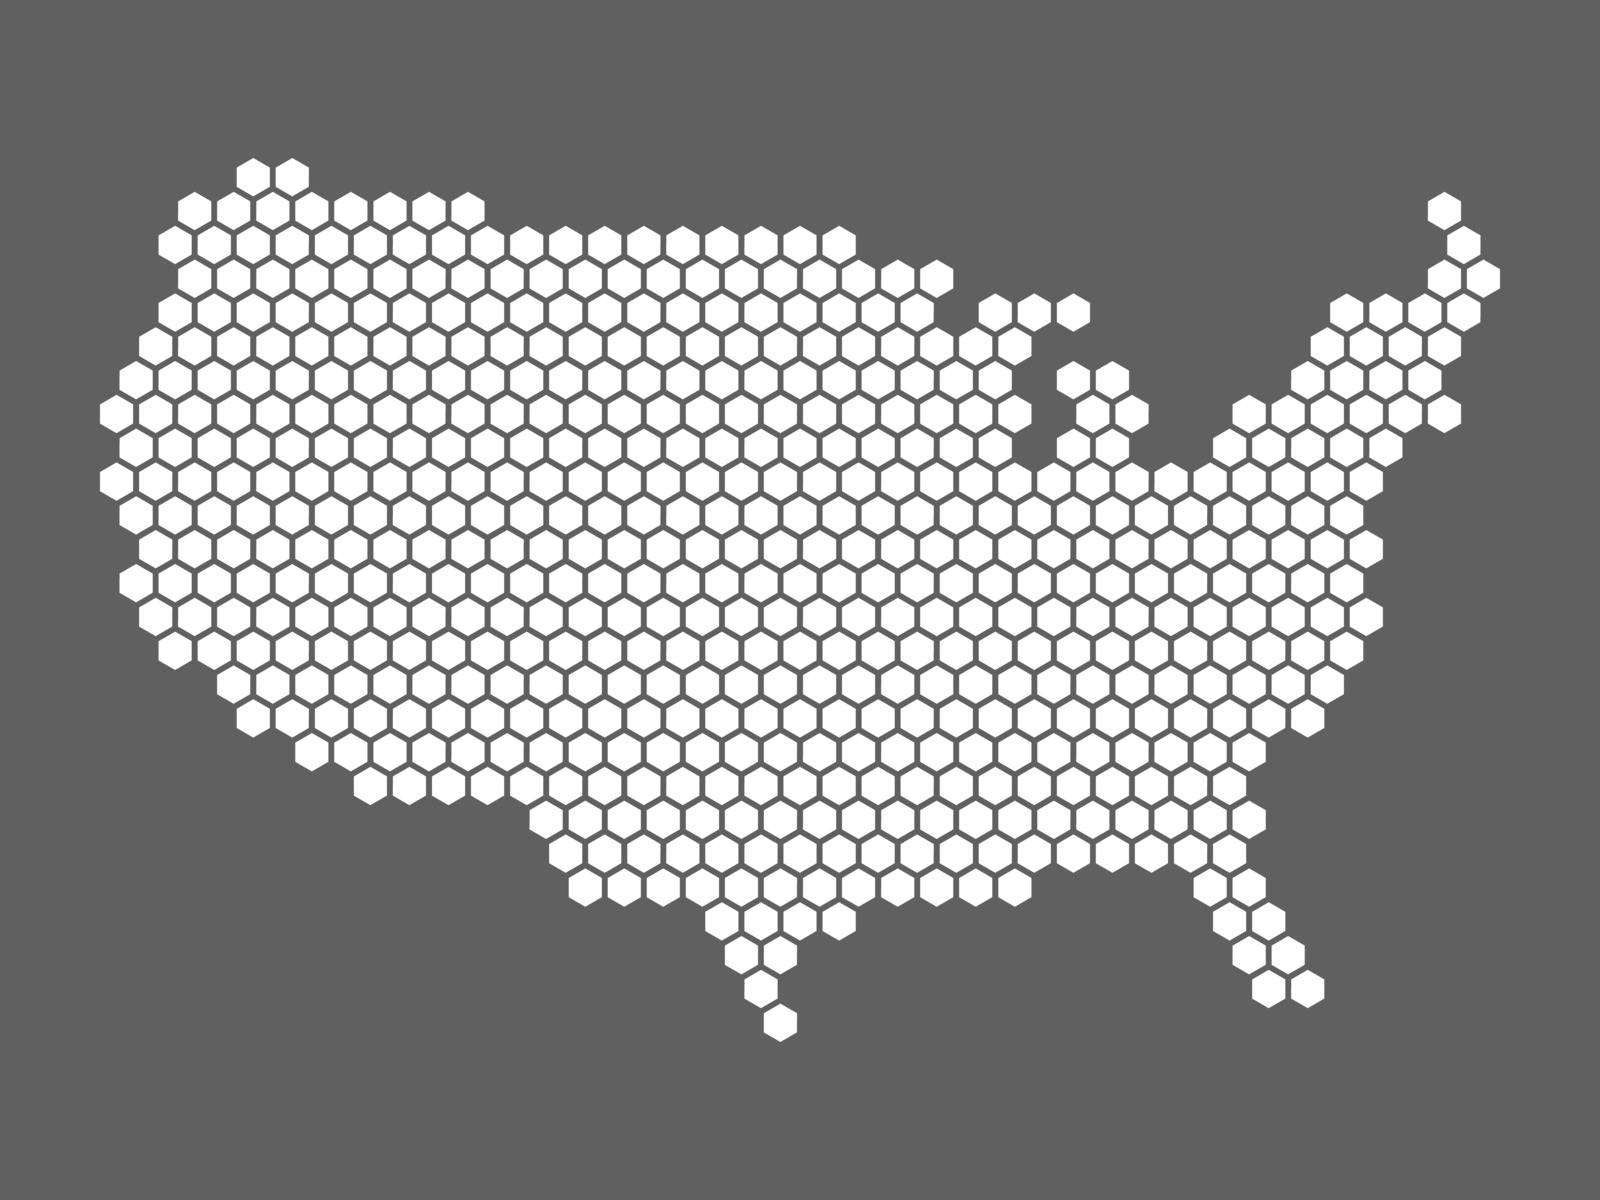 Abstract USA map of hexagons by pyty